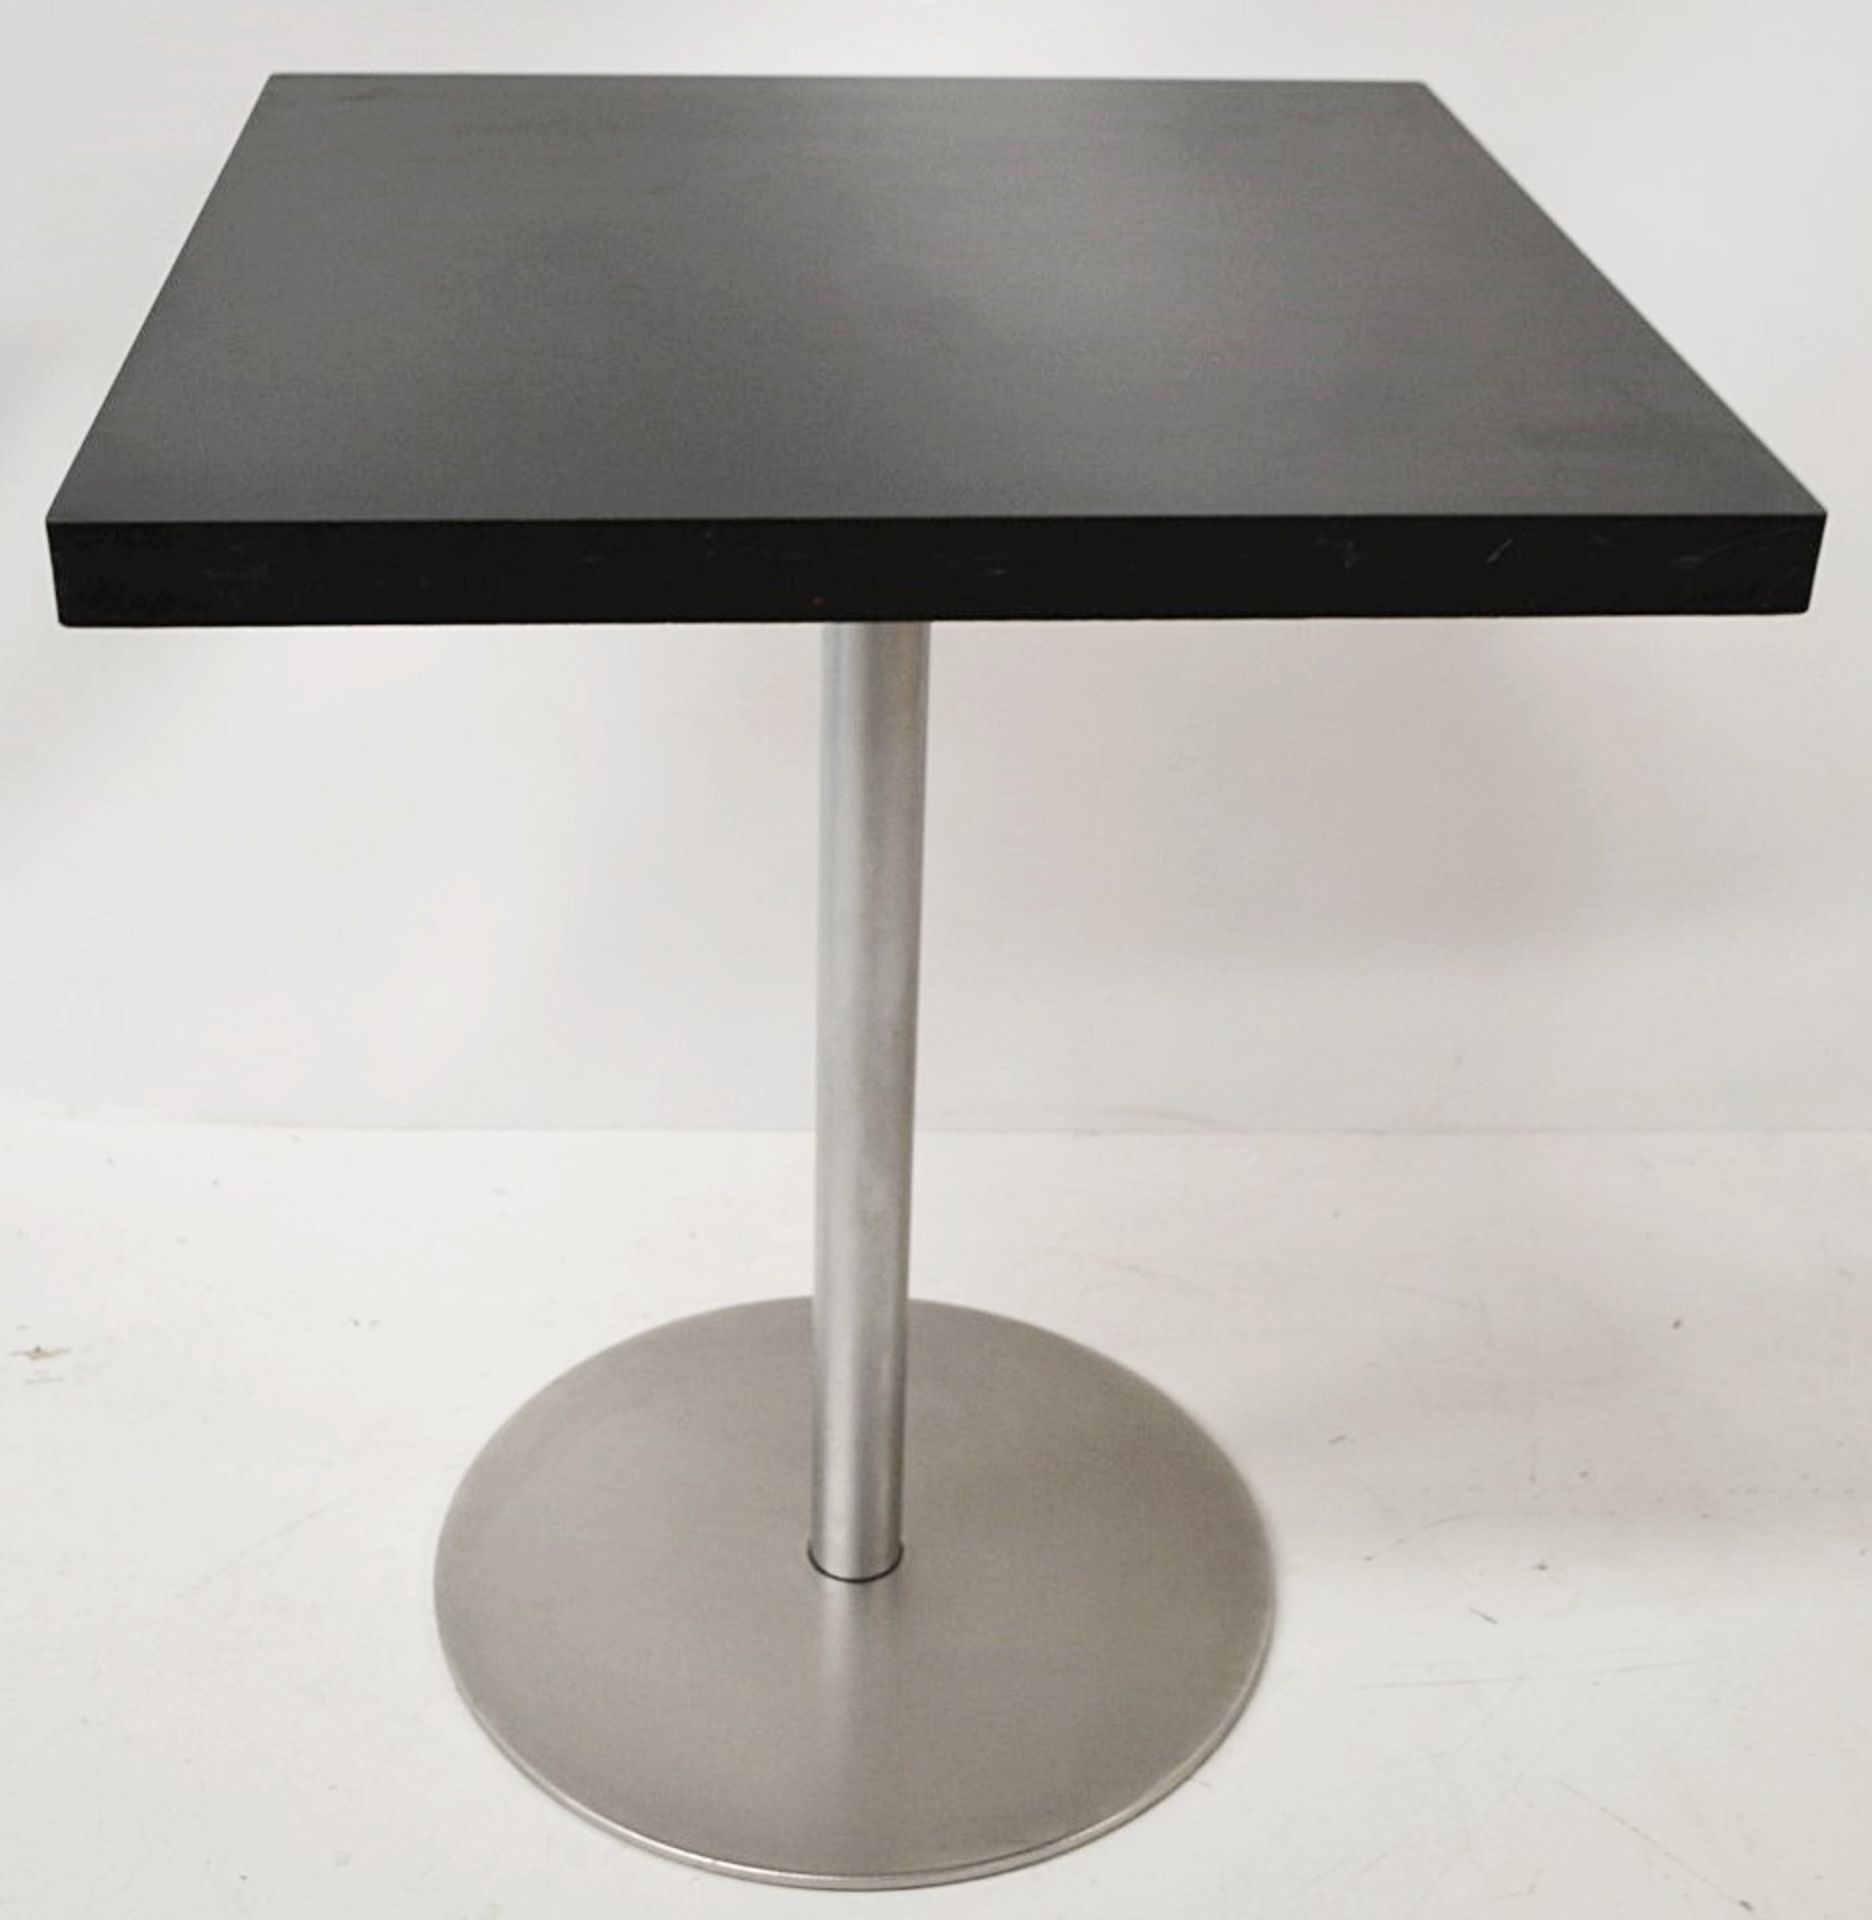 5 x Square Black Indoor Cafe Bistro Tables with Chrome Bases - Dimensions: 60 x 60 x Height 74cm